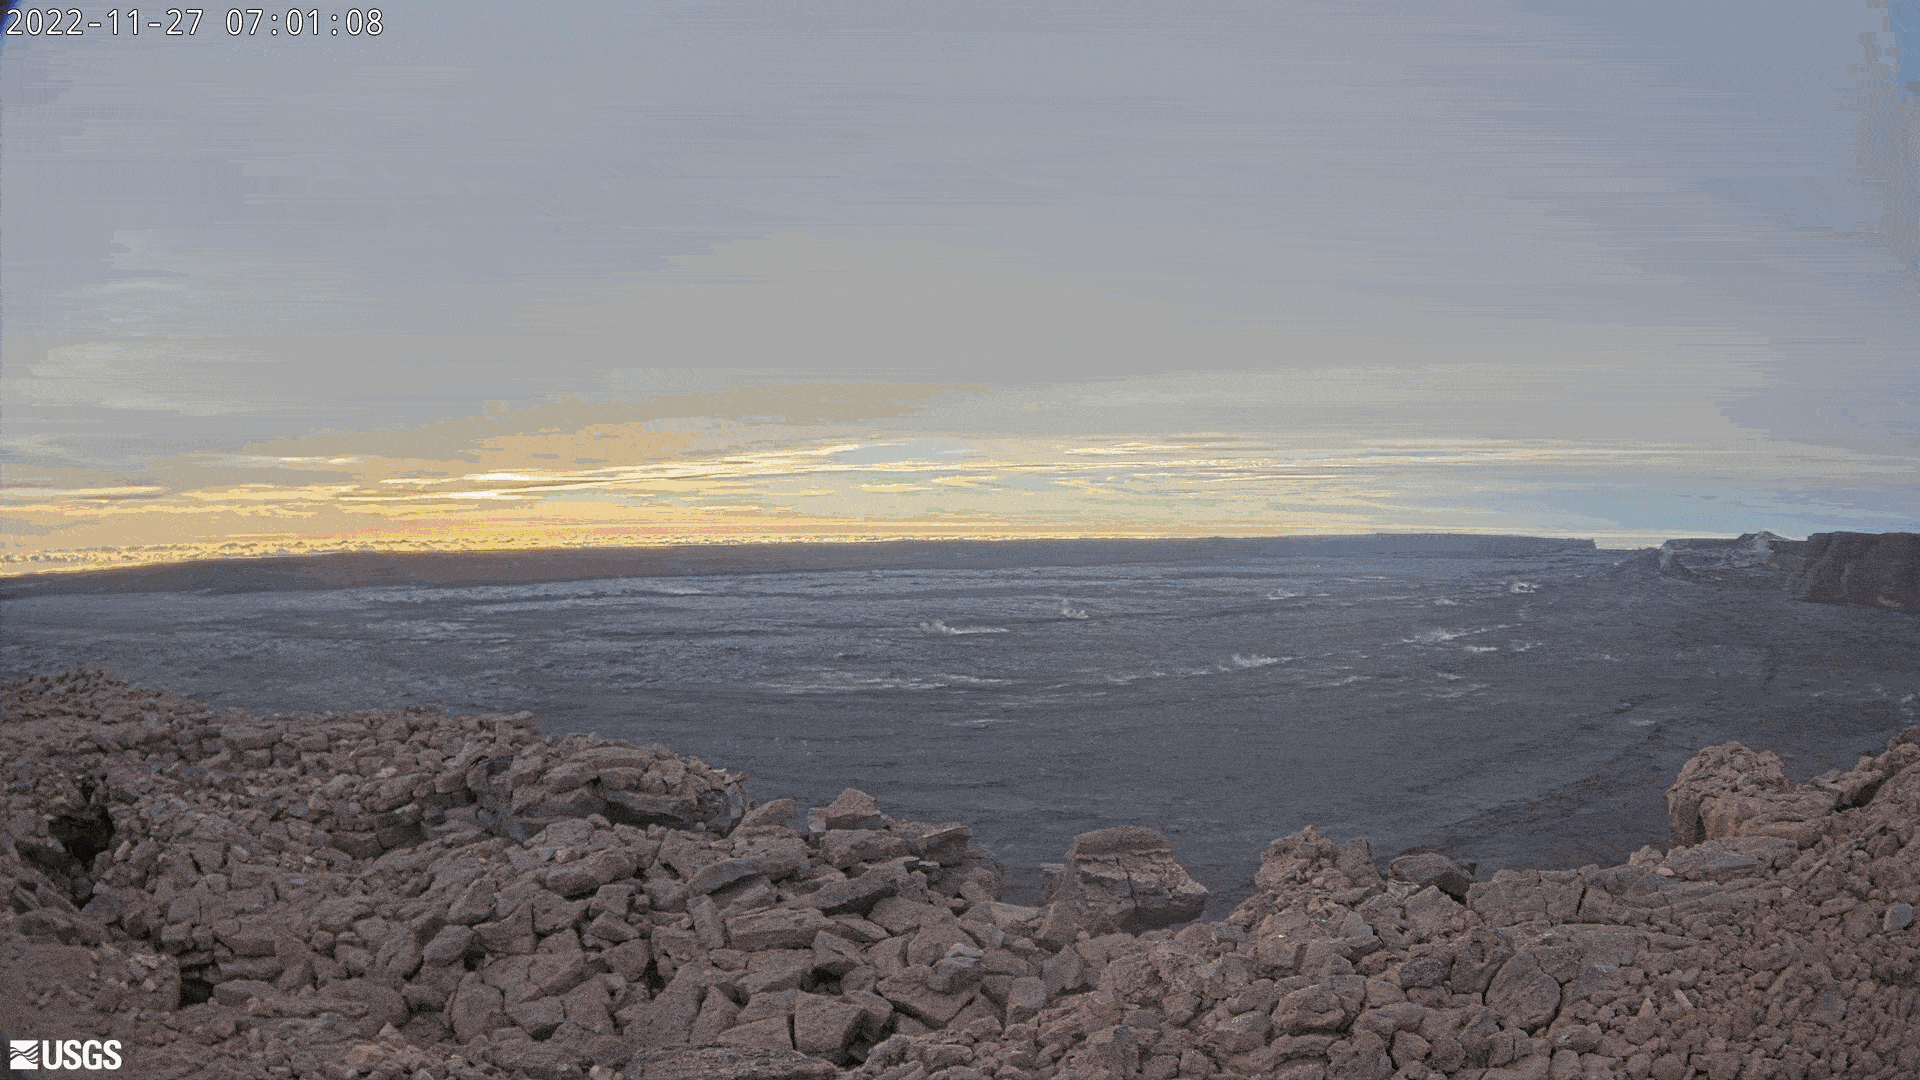 A GIF shows the progression of Mauna Loa's eruption over the course of Sunday and early Monday.